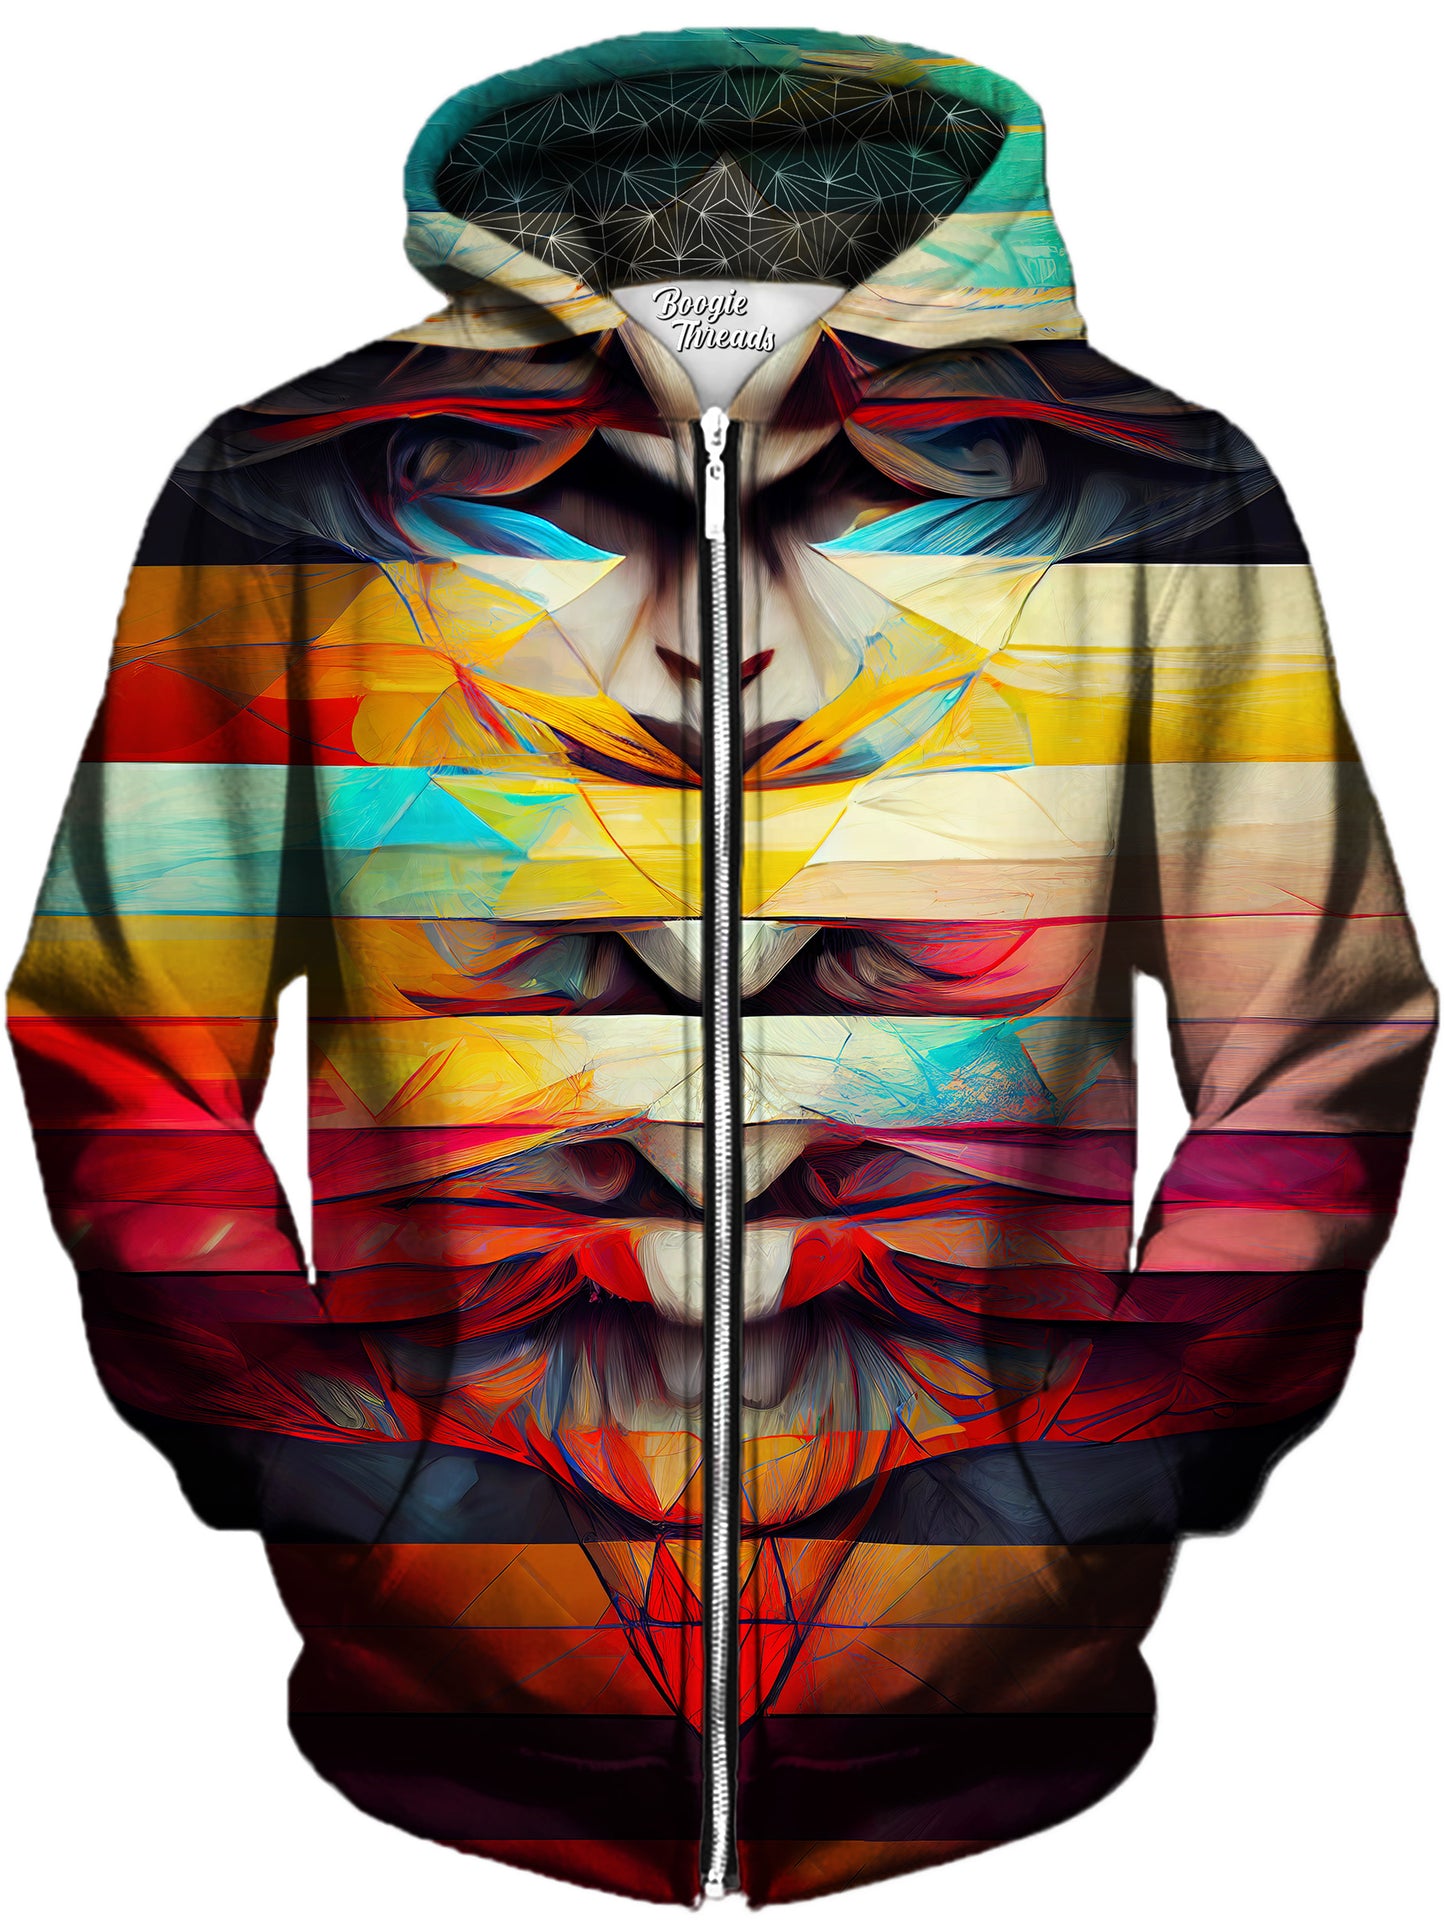 Illustrious Discovery Unisex Zip-Up Hoodie, Gratefully Dyed, | iEDM